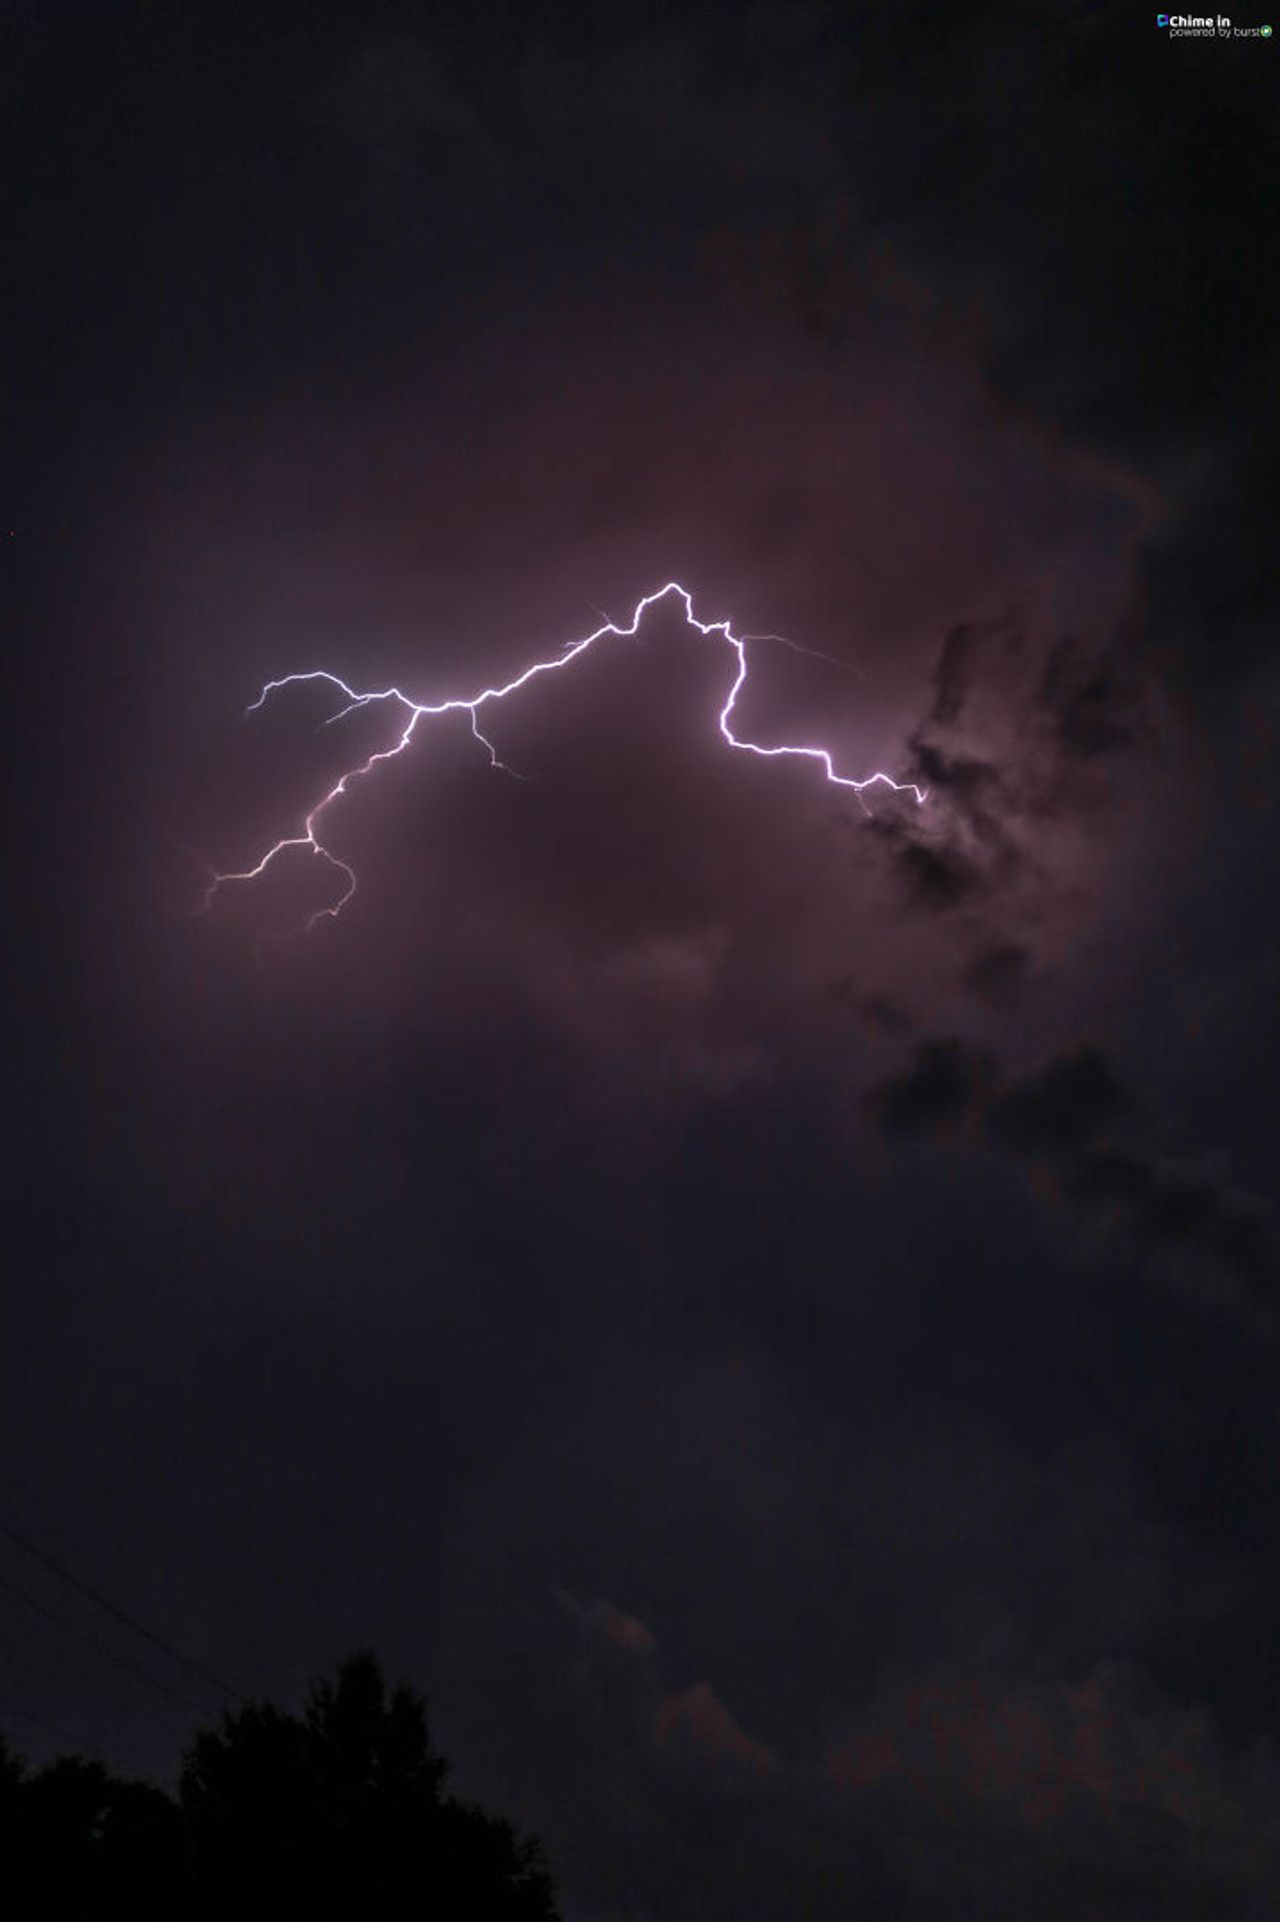 A lightning bolt is seen in the sky - Storm